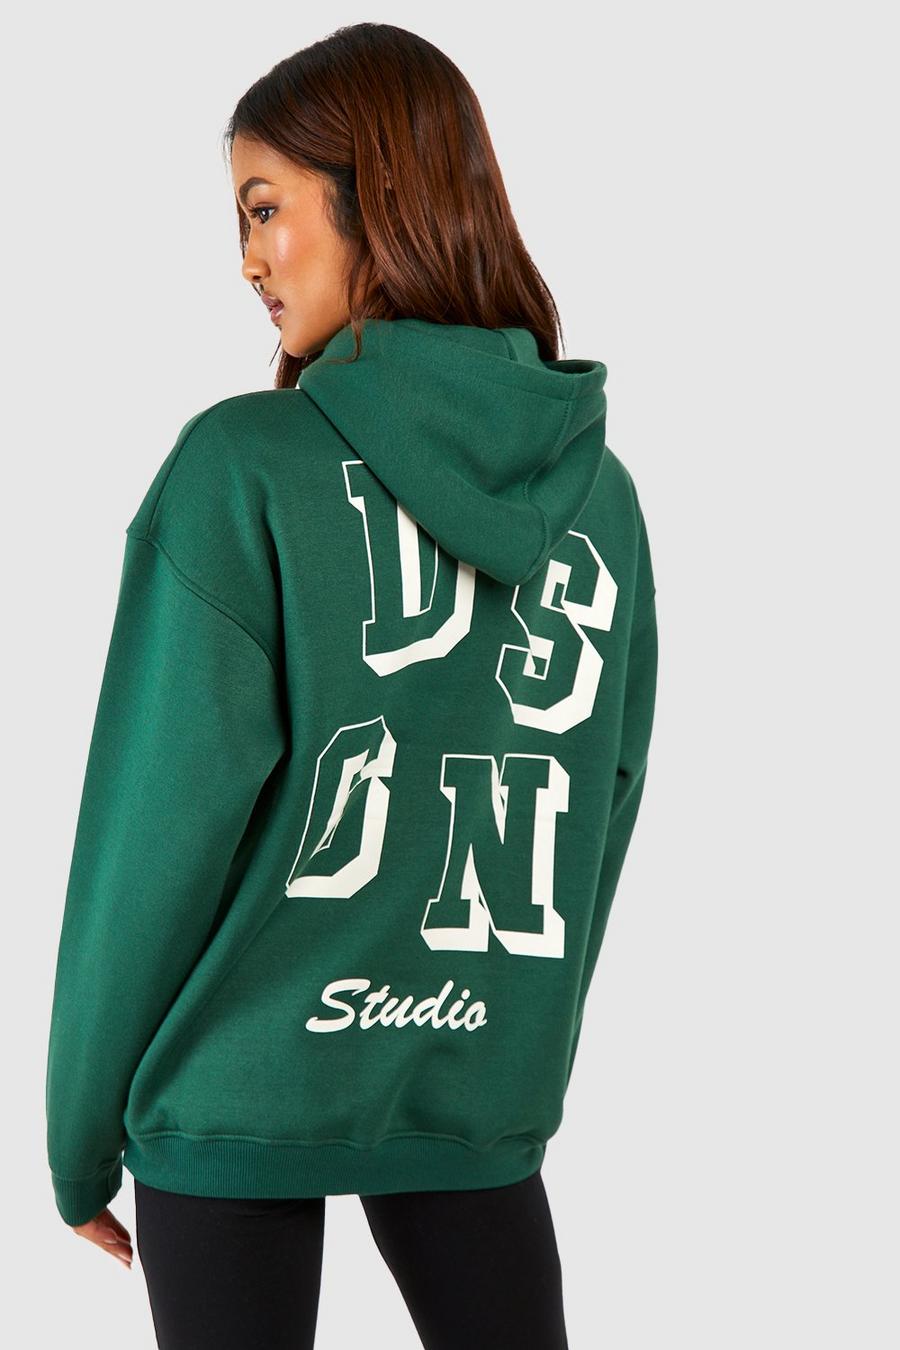 Forest Tall Dsgn Studio Slogan Printed Hoodie image number 1